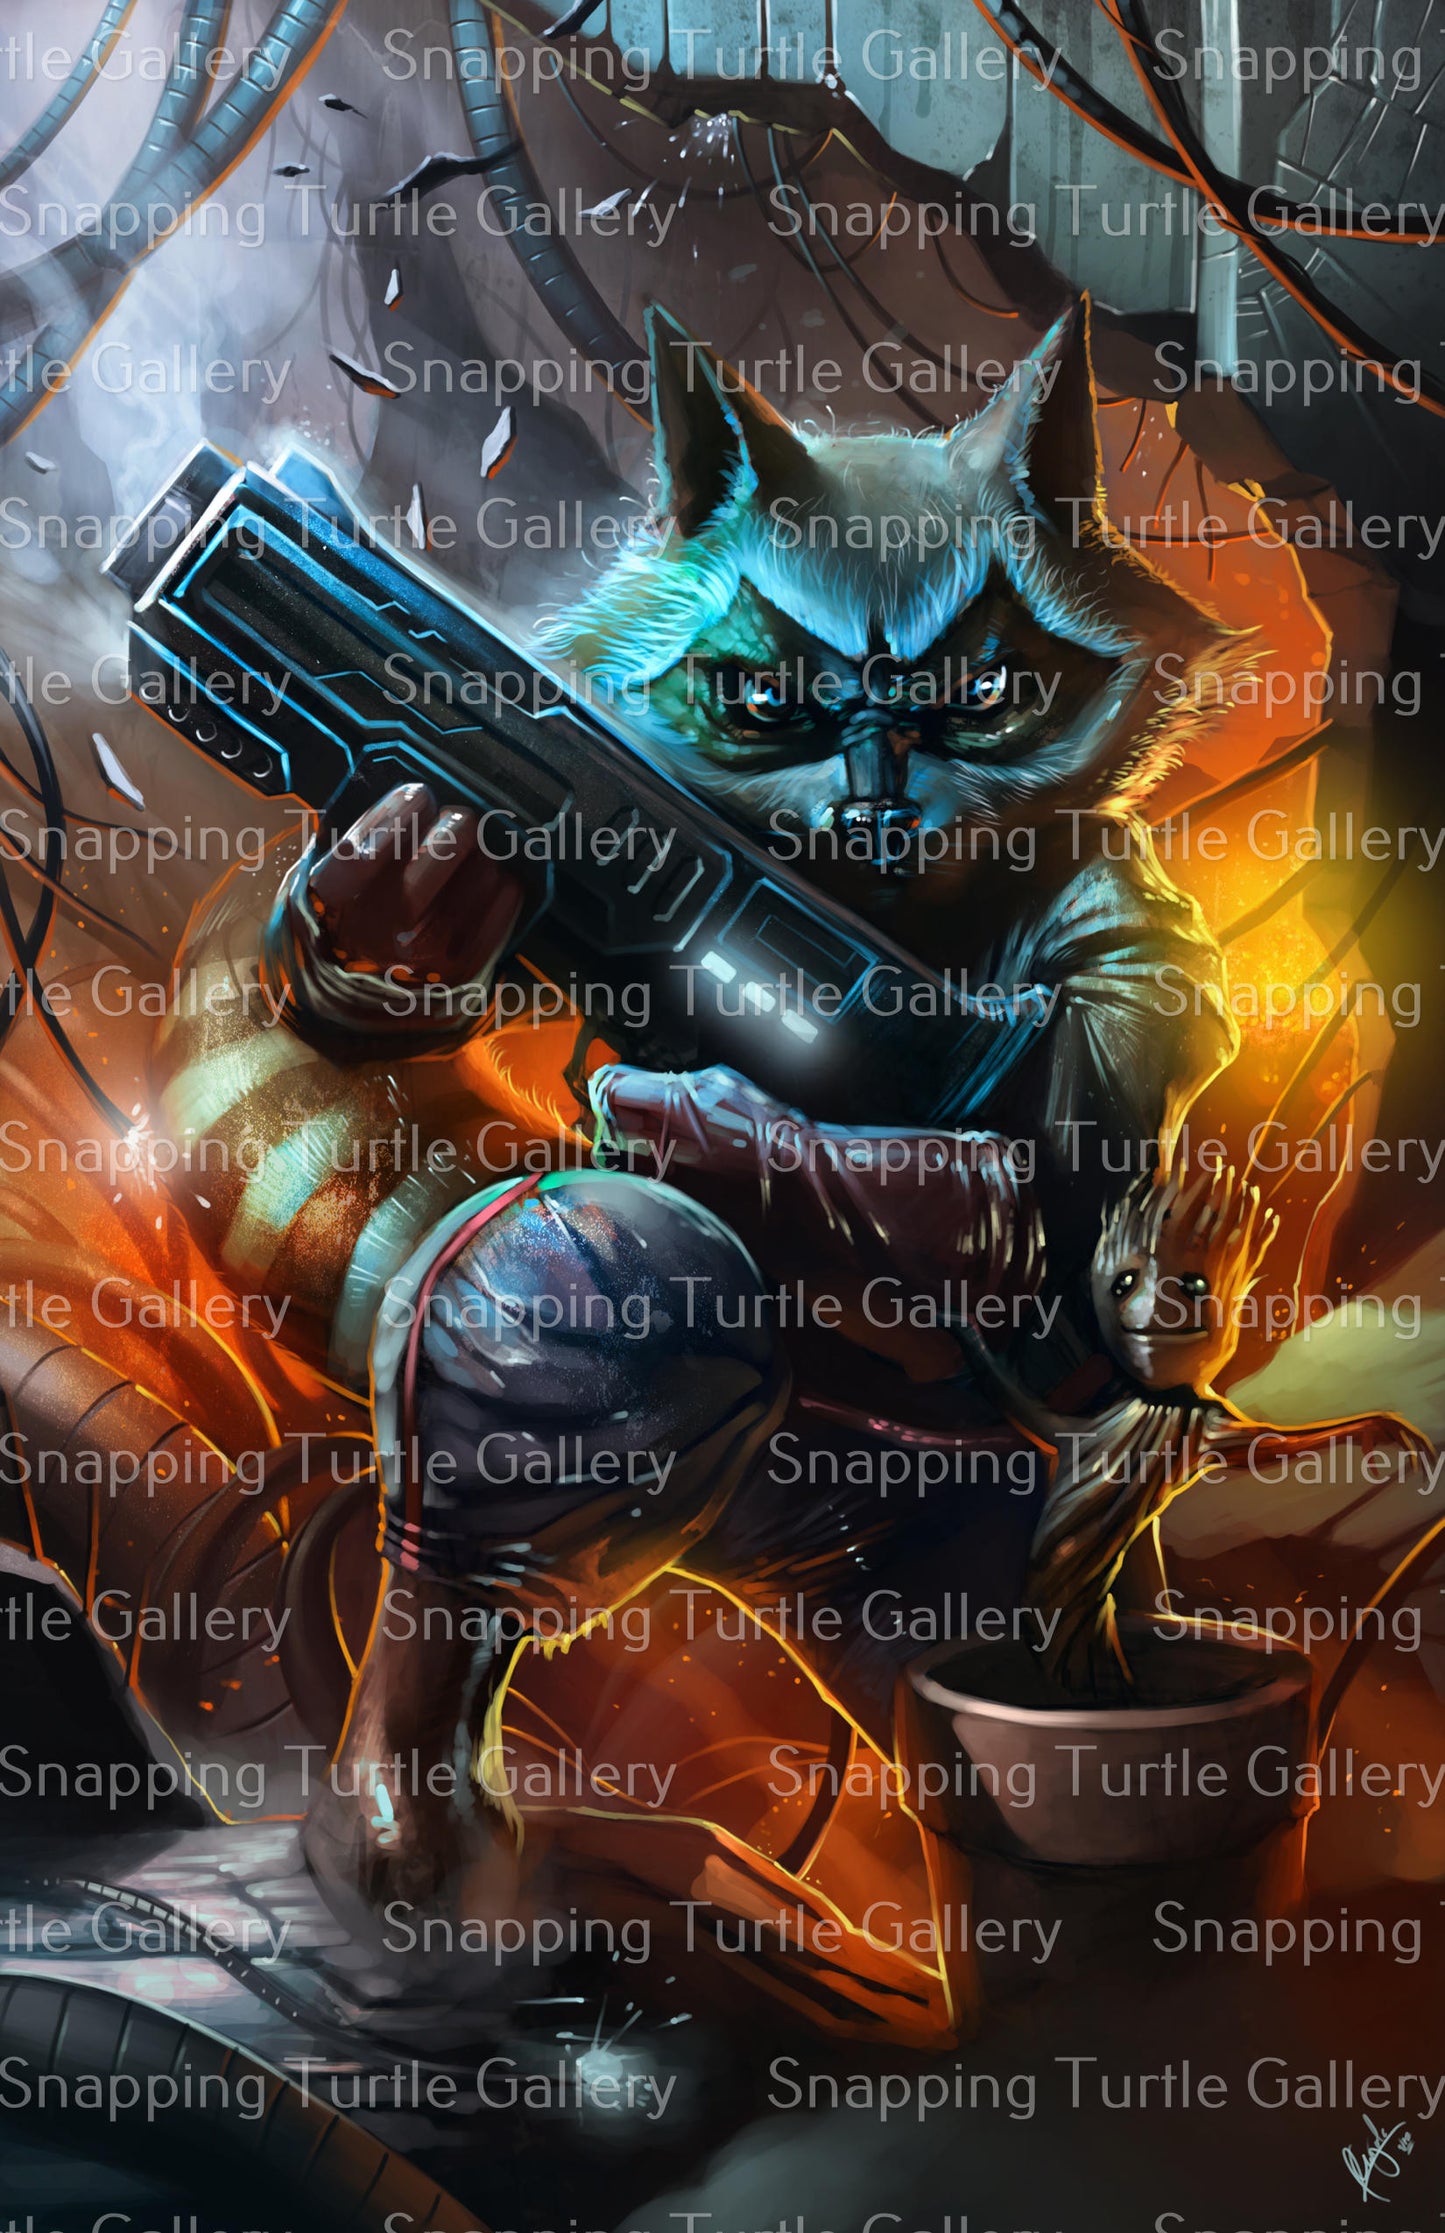 Rocket Raccoon and Groot - Snapping Turtle Gallery